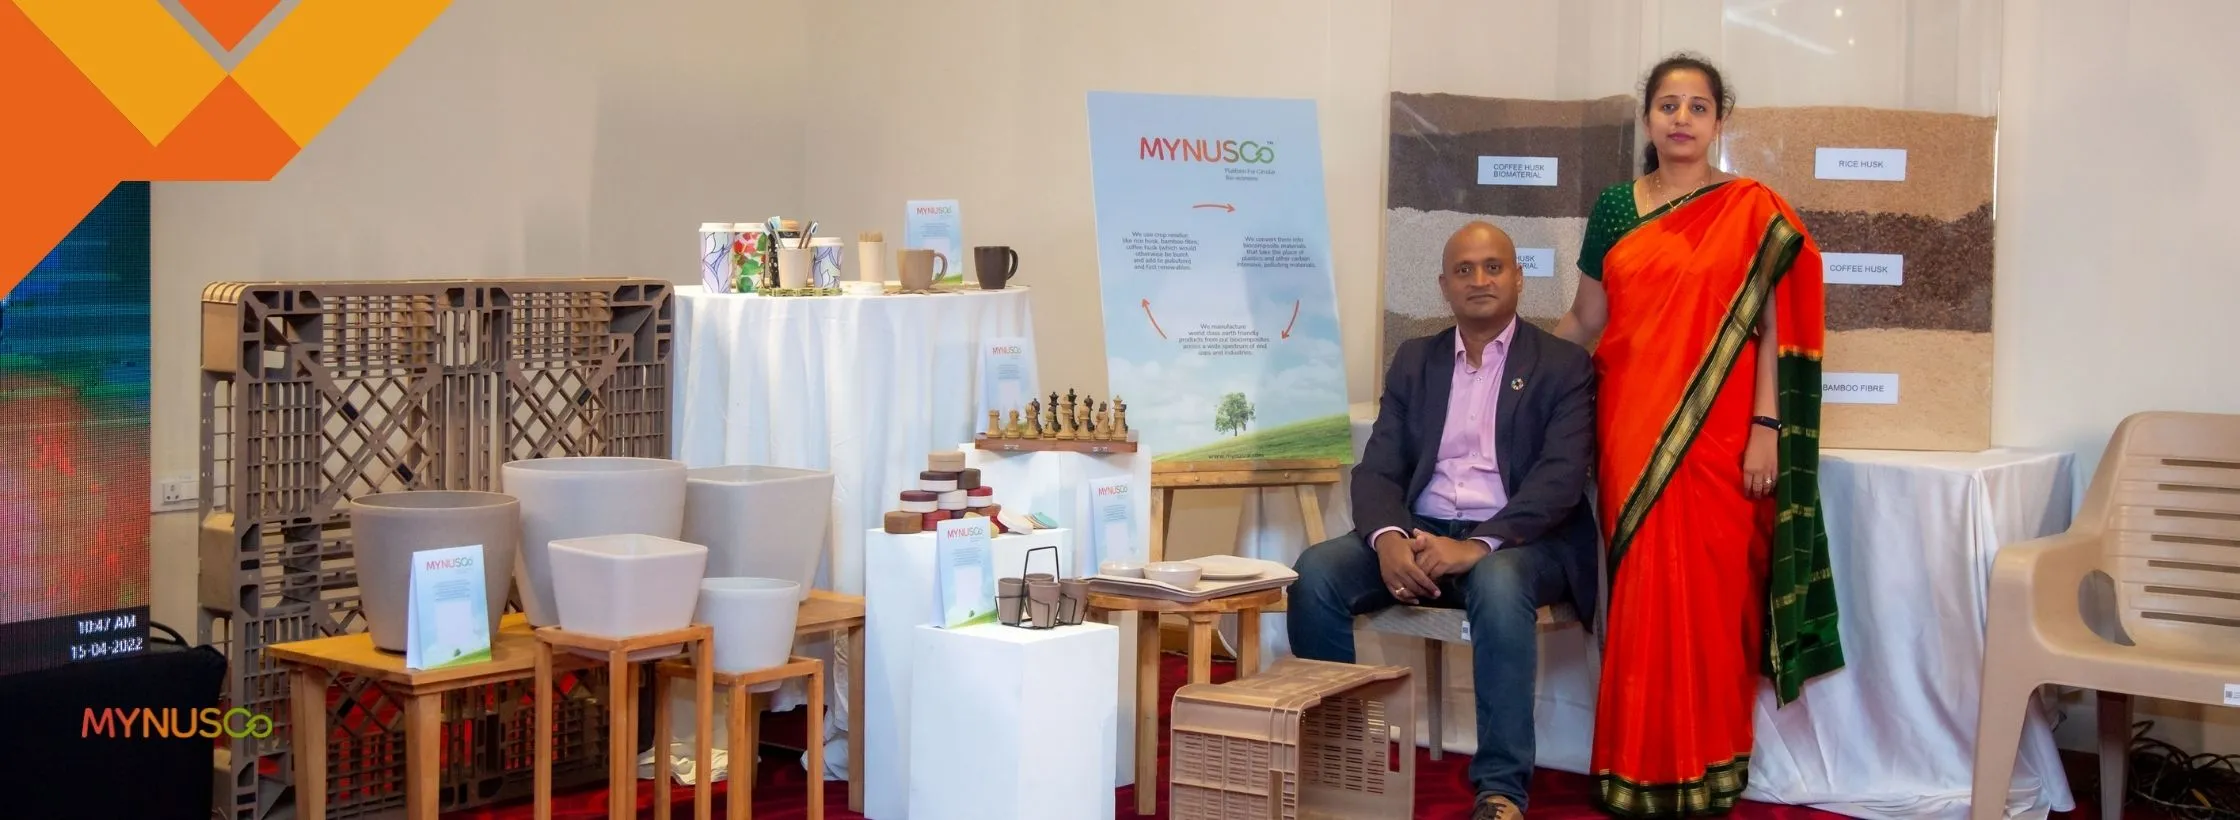 Mynusco Pioneers Biomaterial Platform to Fight Climate Change | By SME Street